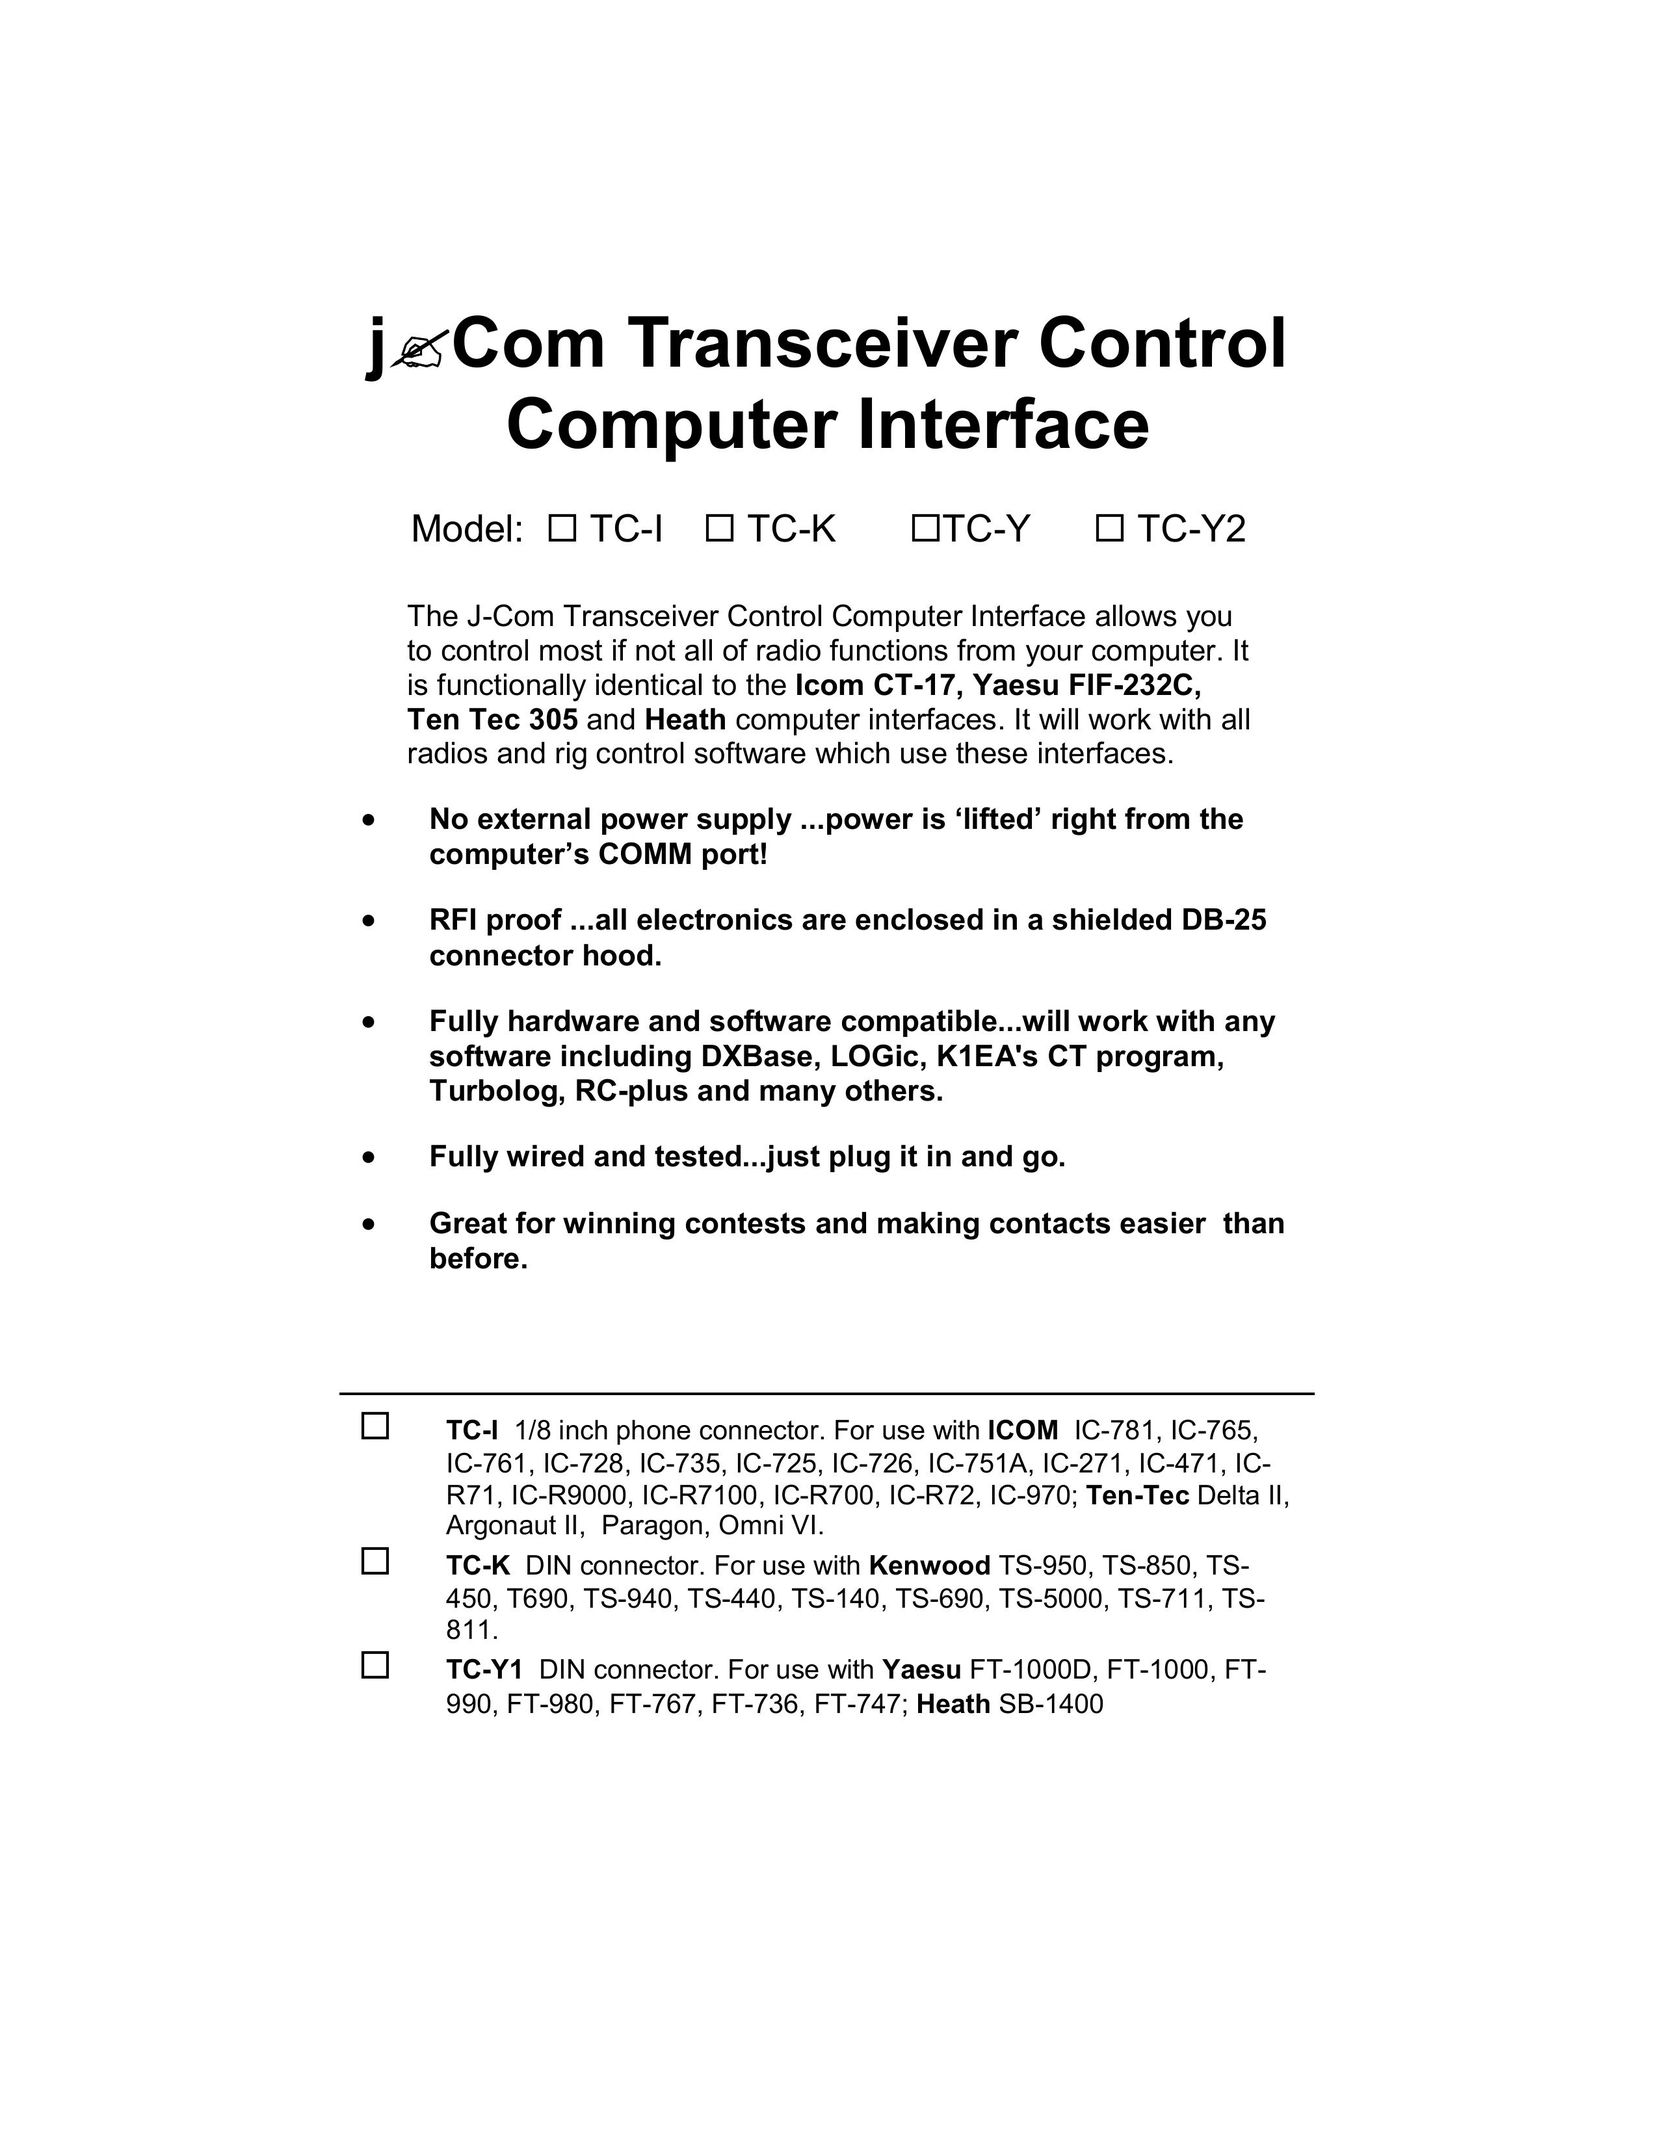 Ramsey Electronics TCCI-1 Computer Accessories User Manual